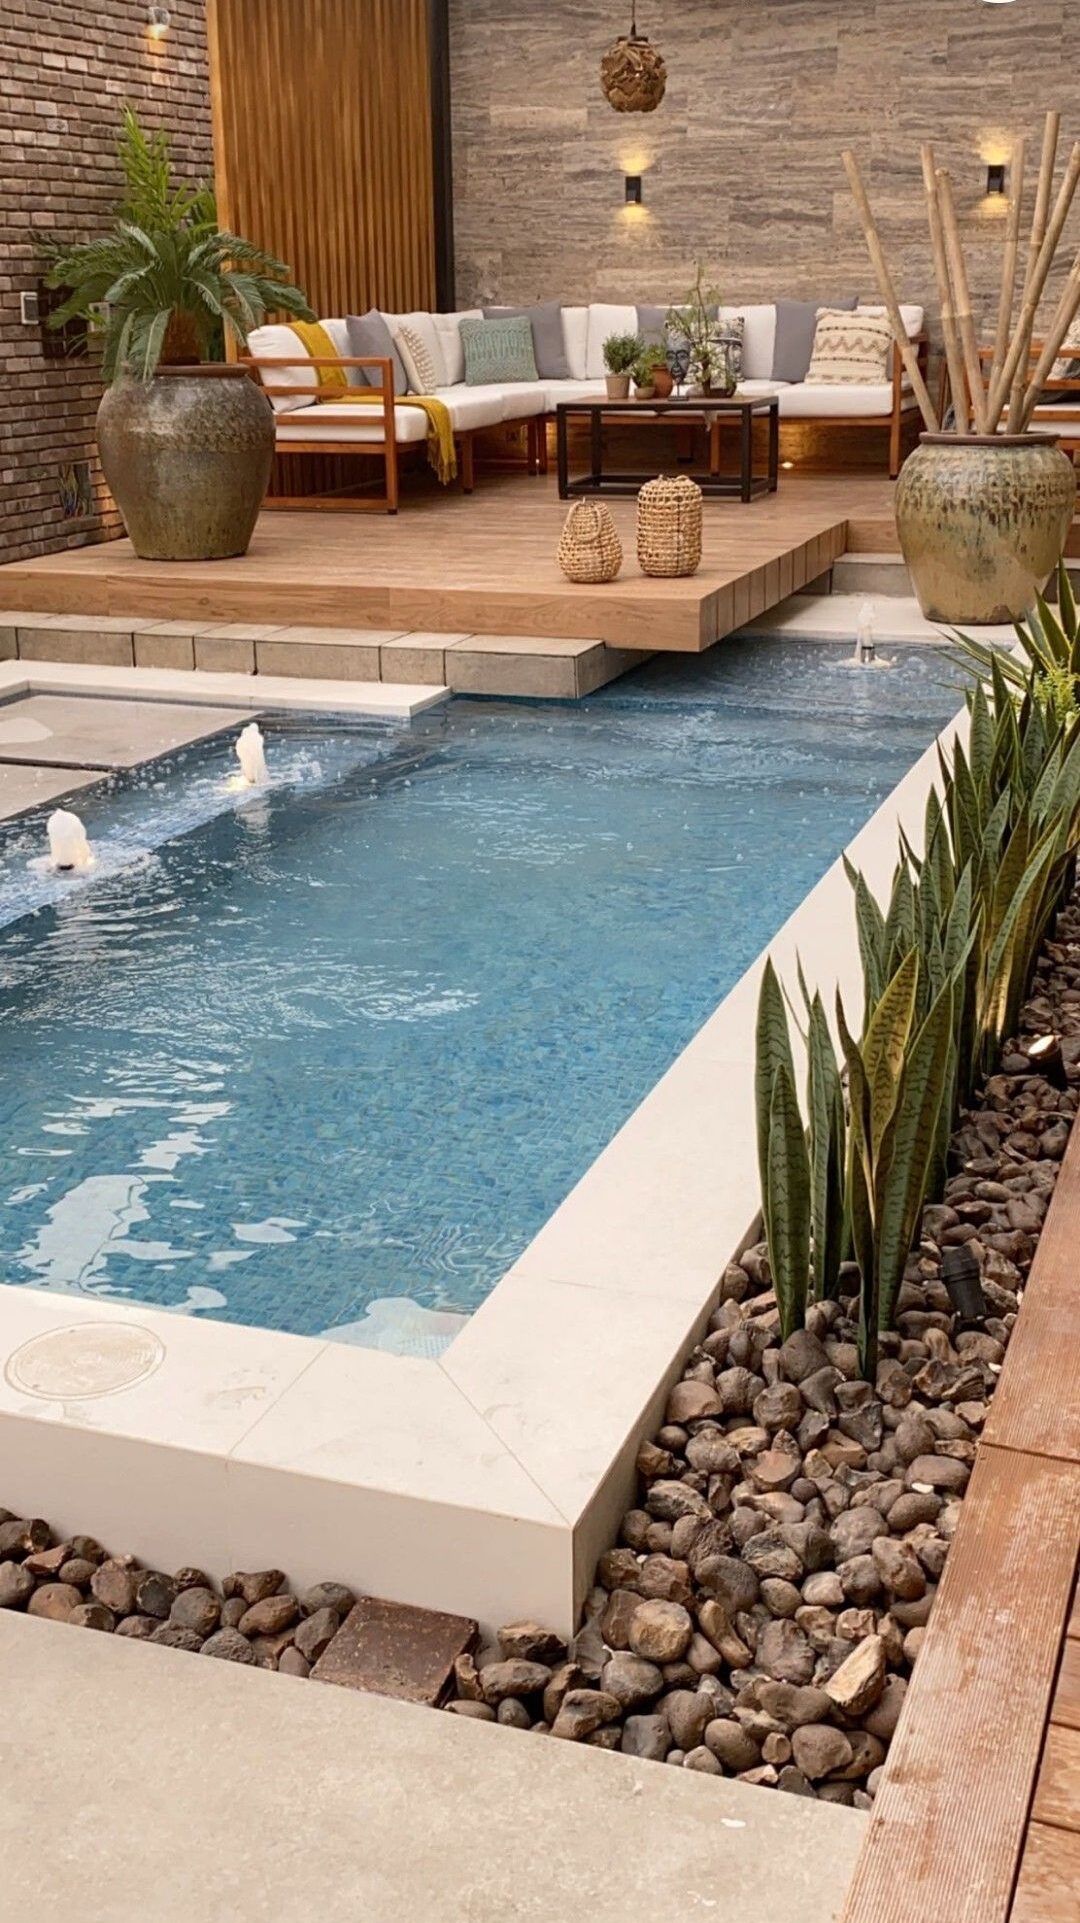 Perfecting Your Poolside Paradise: Creative Landscape Ideas for a Tranquil Outdoor Oasis